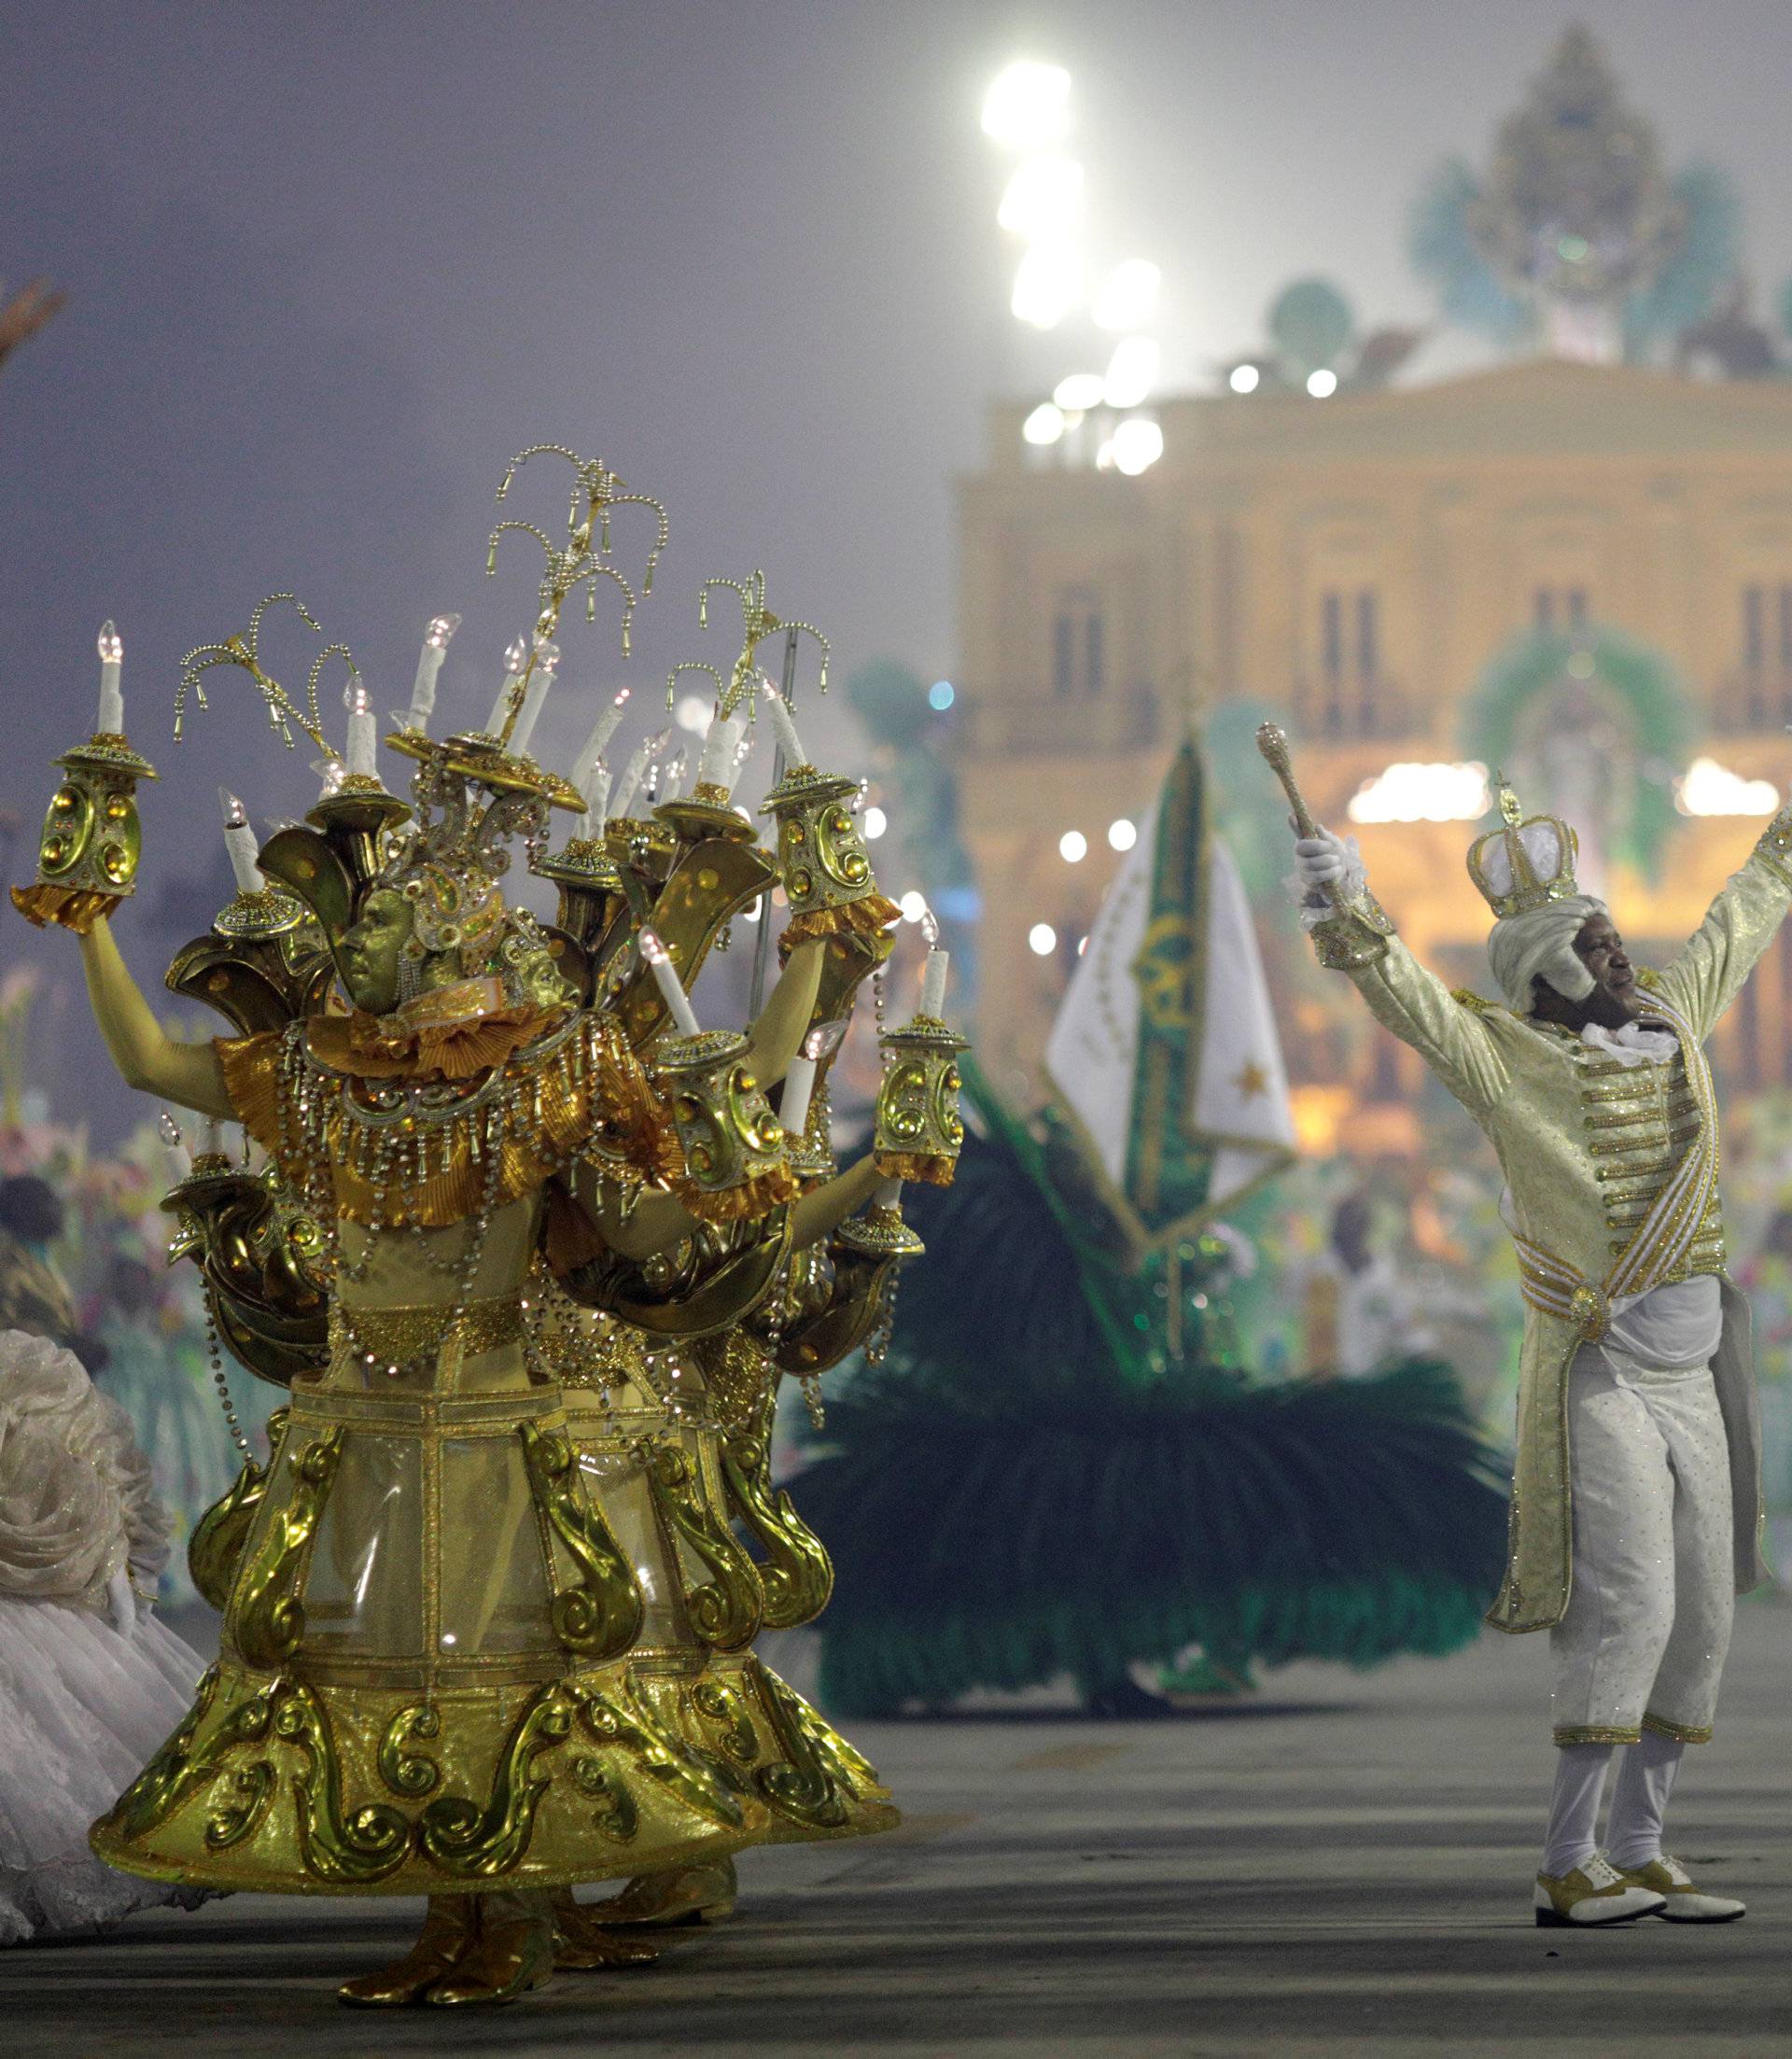 Revellers from Imperatriz samba school perform during the second night of the Carnival parade at the Sambadrome in Rio de Janeiro